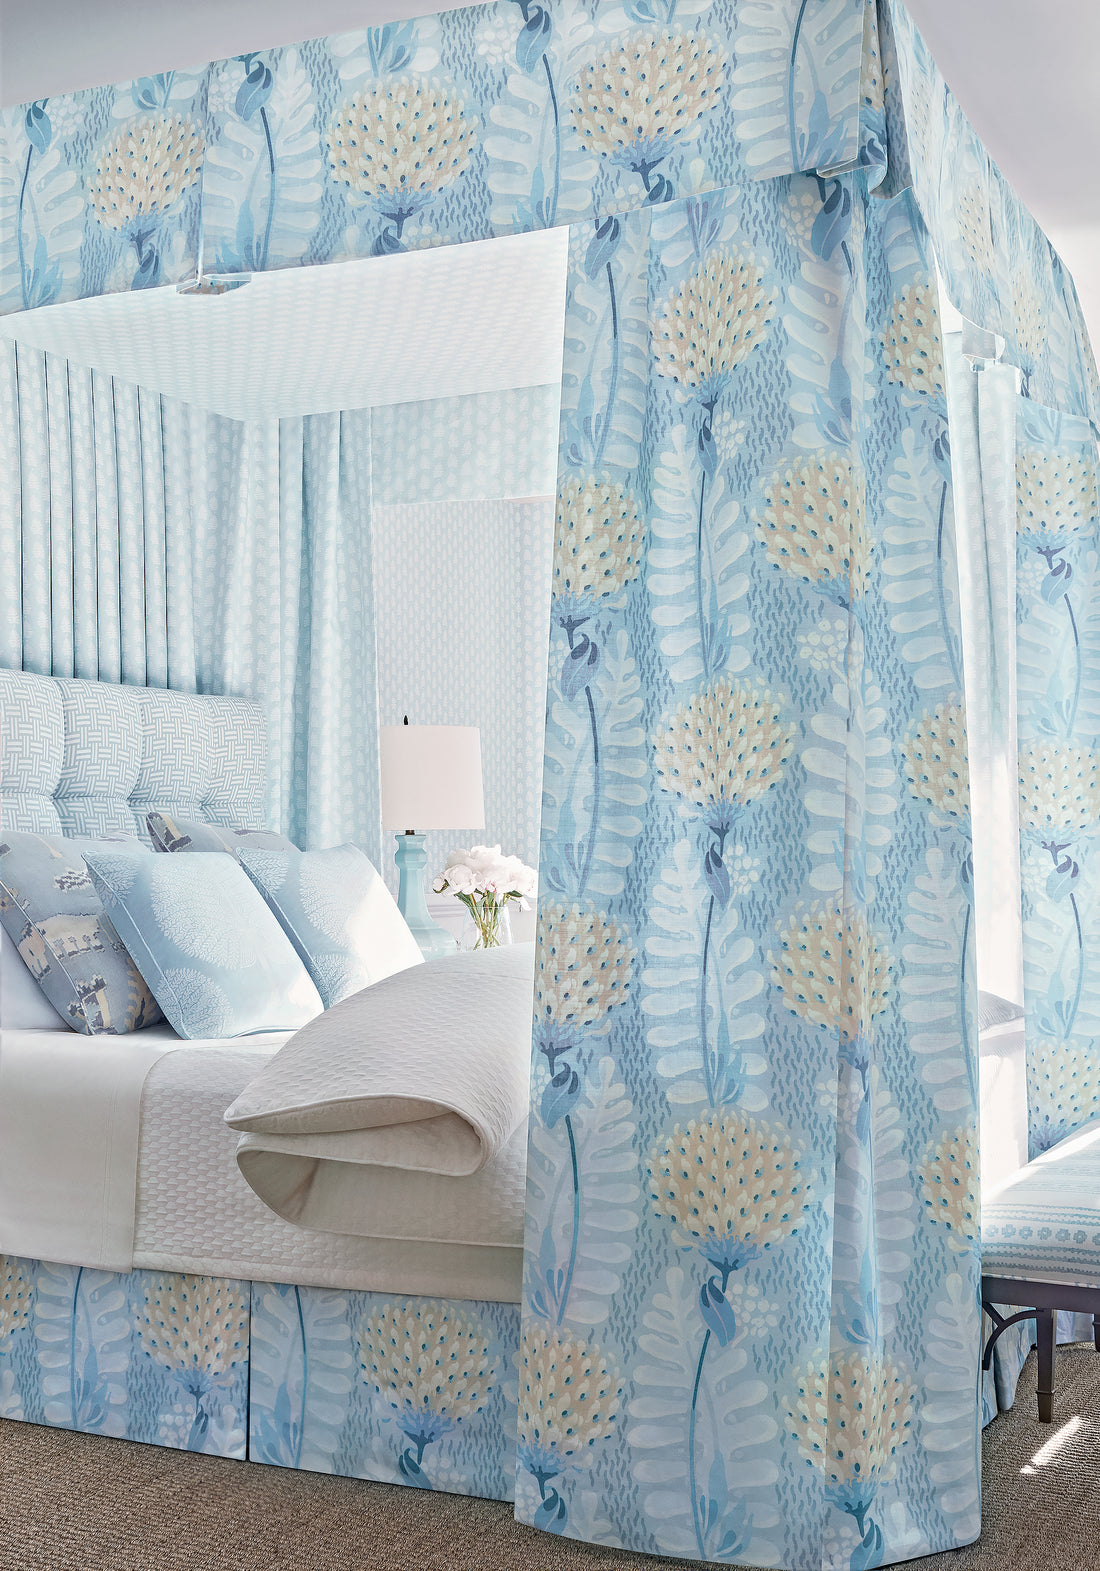 Bedskirt and canopy made with Thibaut Tiverton printed fabric in Spa Blue color, pattern F910645